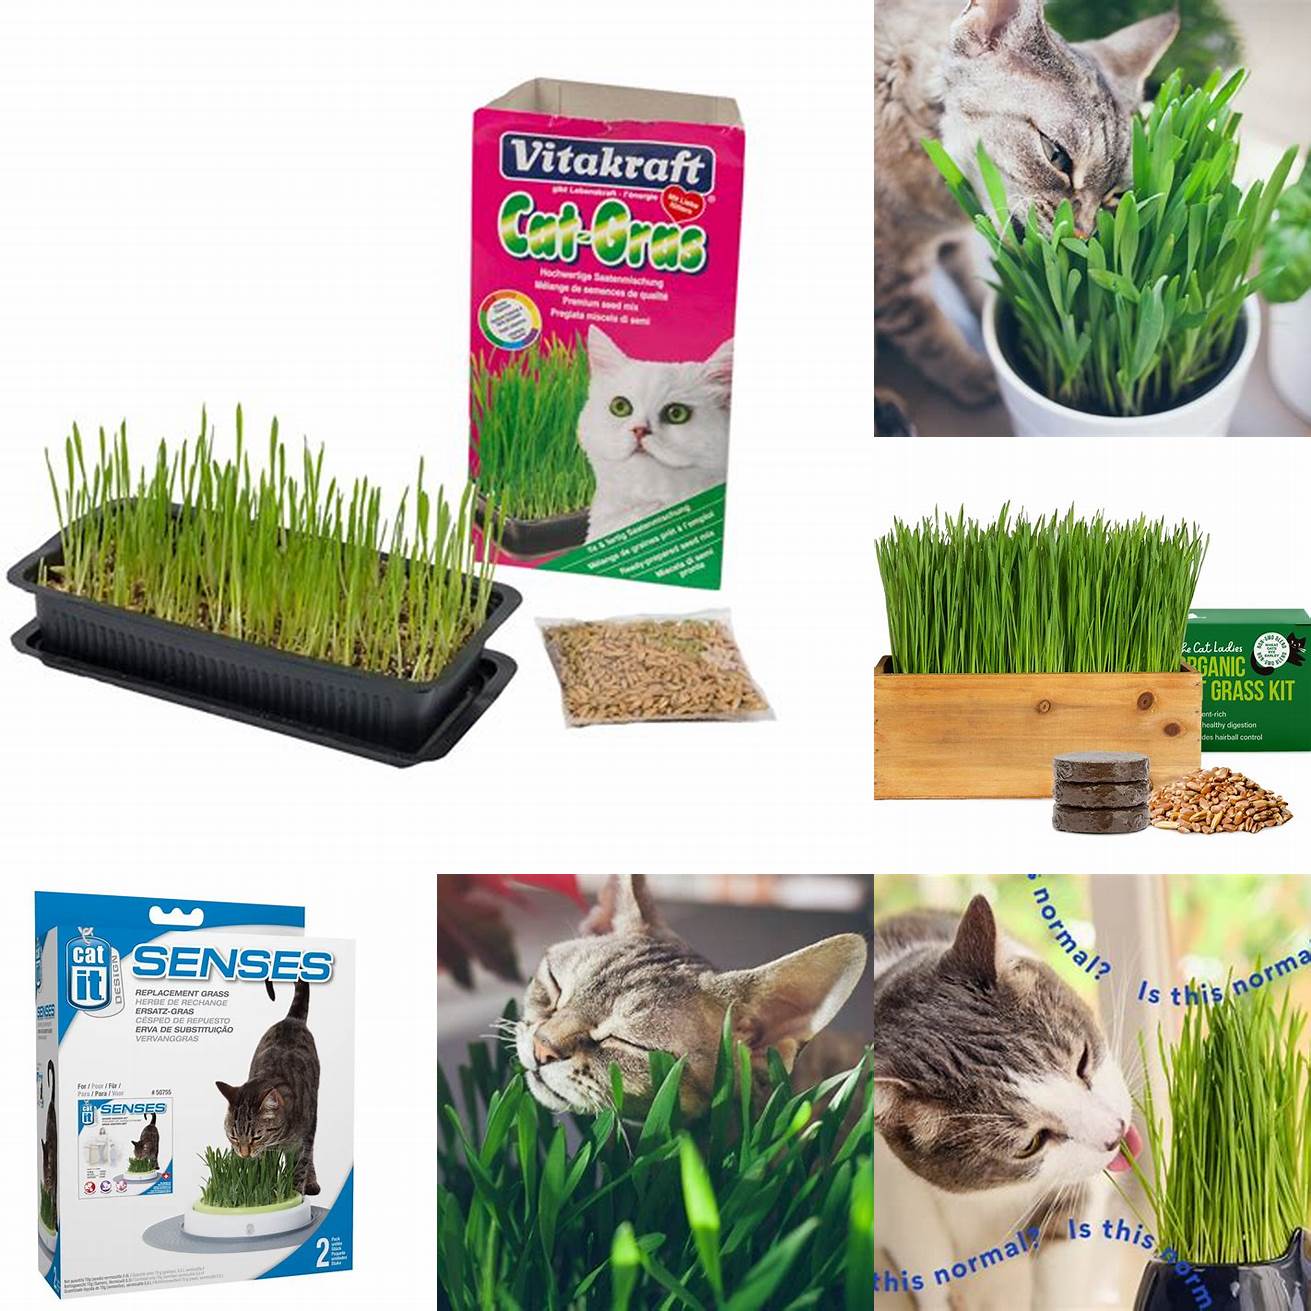 Improving digestion The fiber in cat grass helps regulate bowel movement and prevent hairballs from forming in your cats digestive system